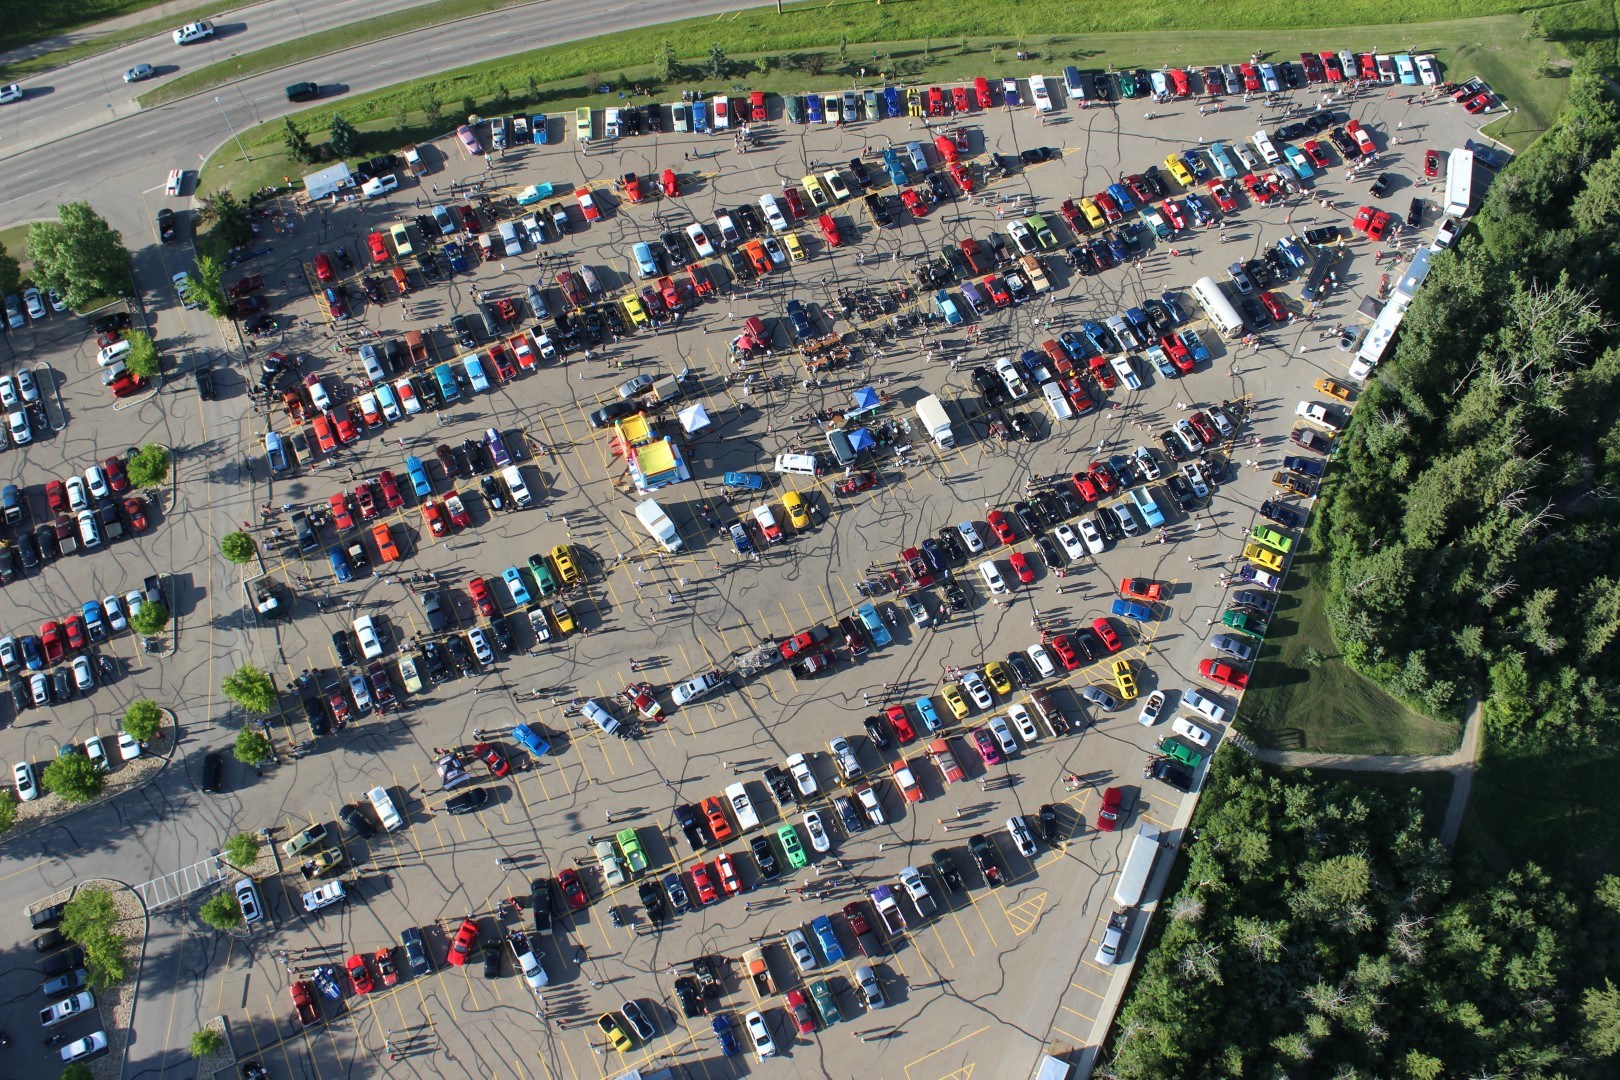 FULLY LOADED – Red Deer Cruise Night has found the ideal spot to showcase hundreds of cars each Thursday night throughout the summer.